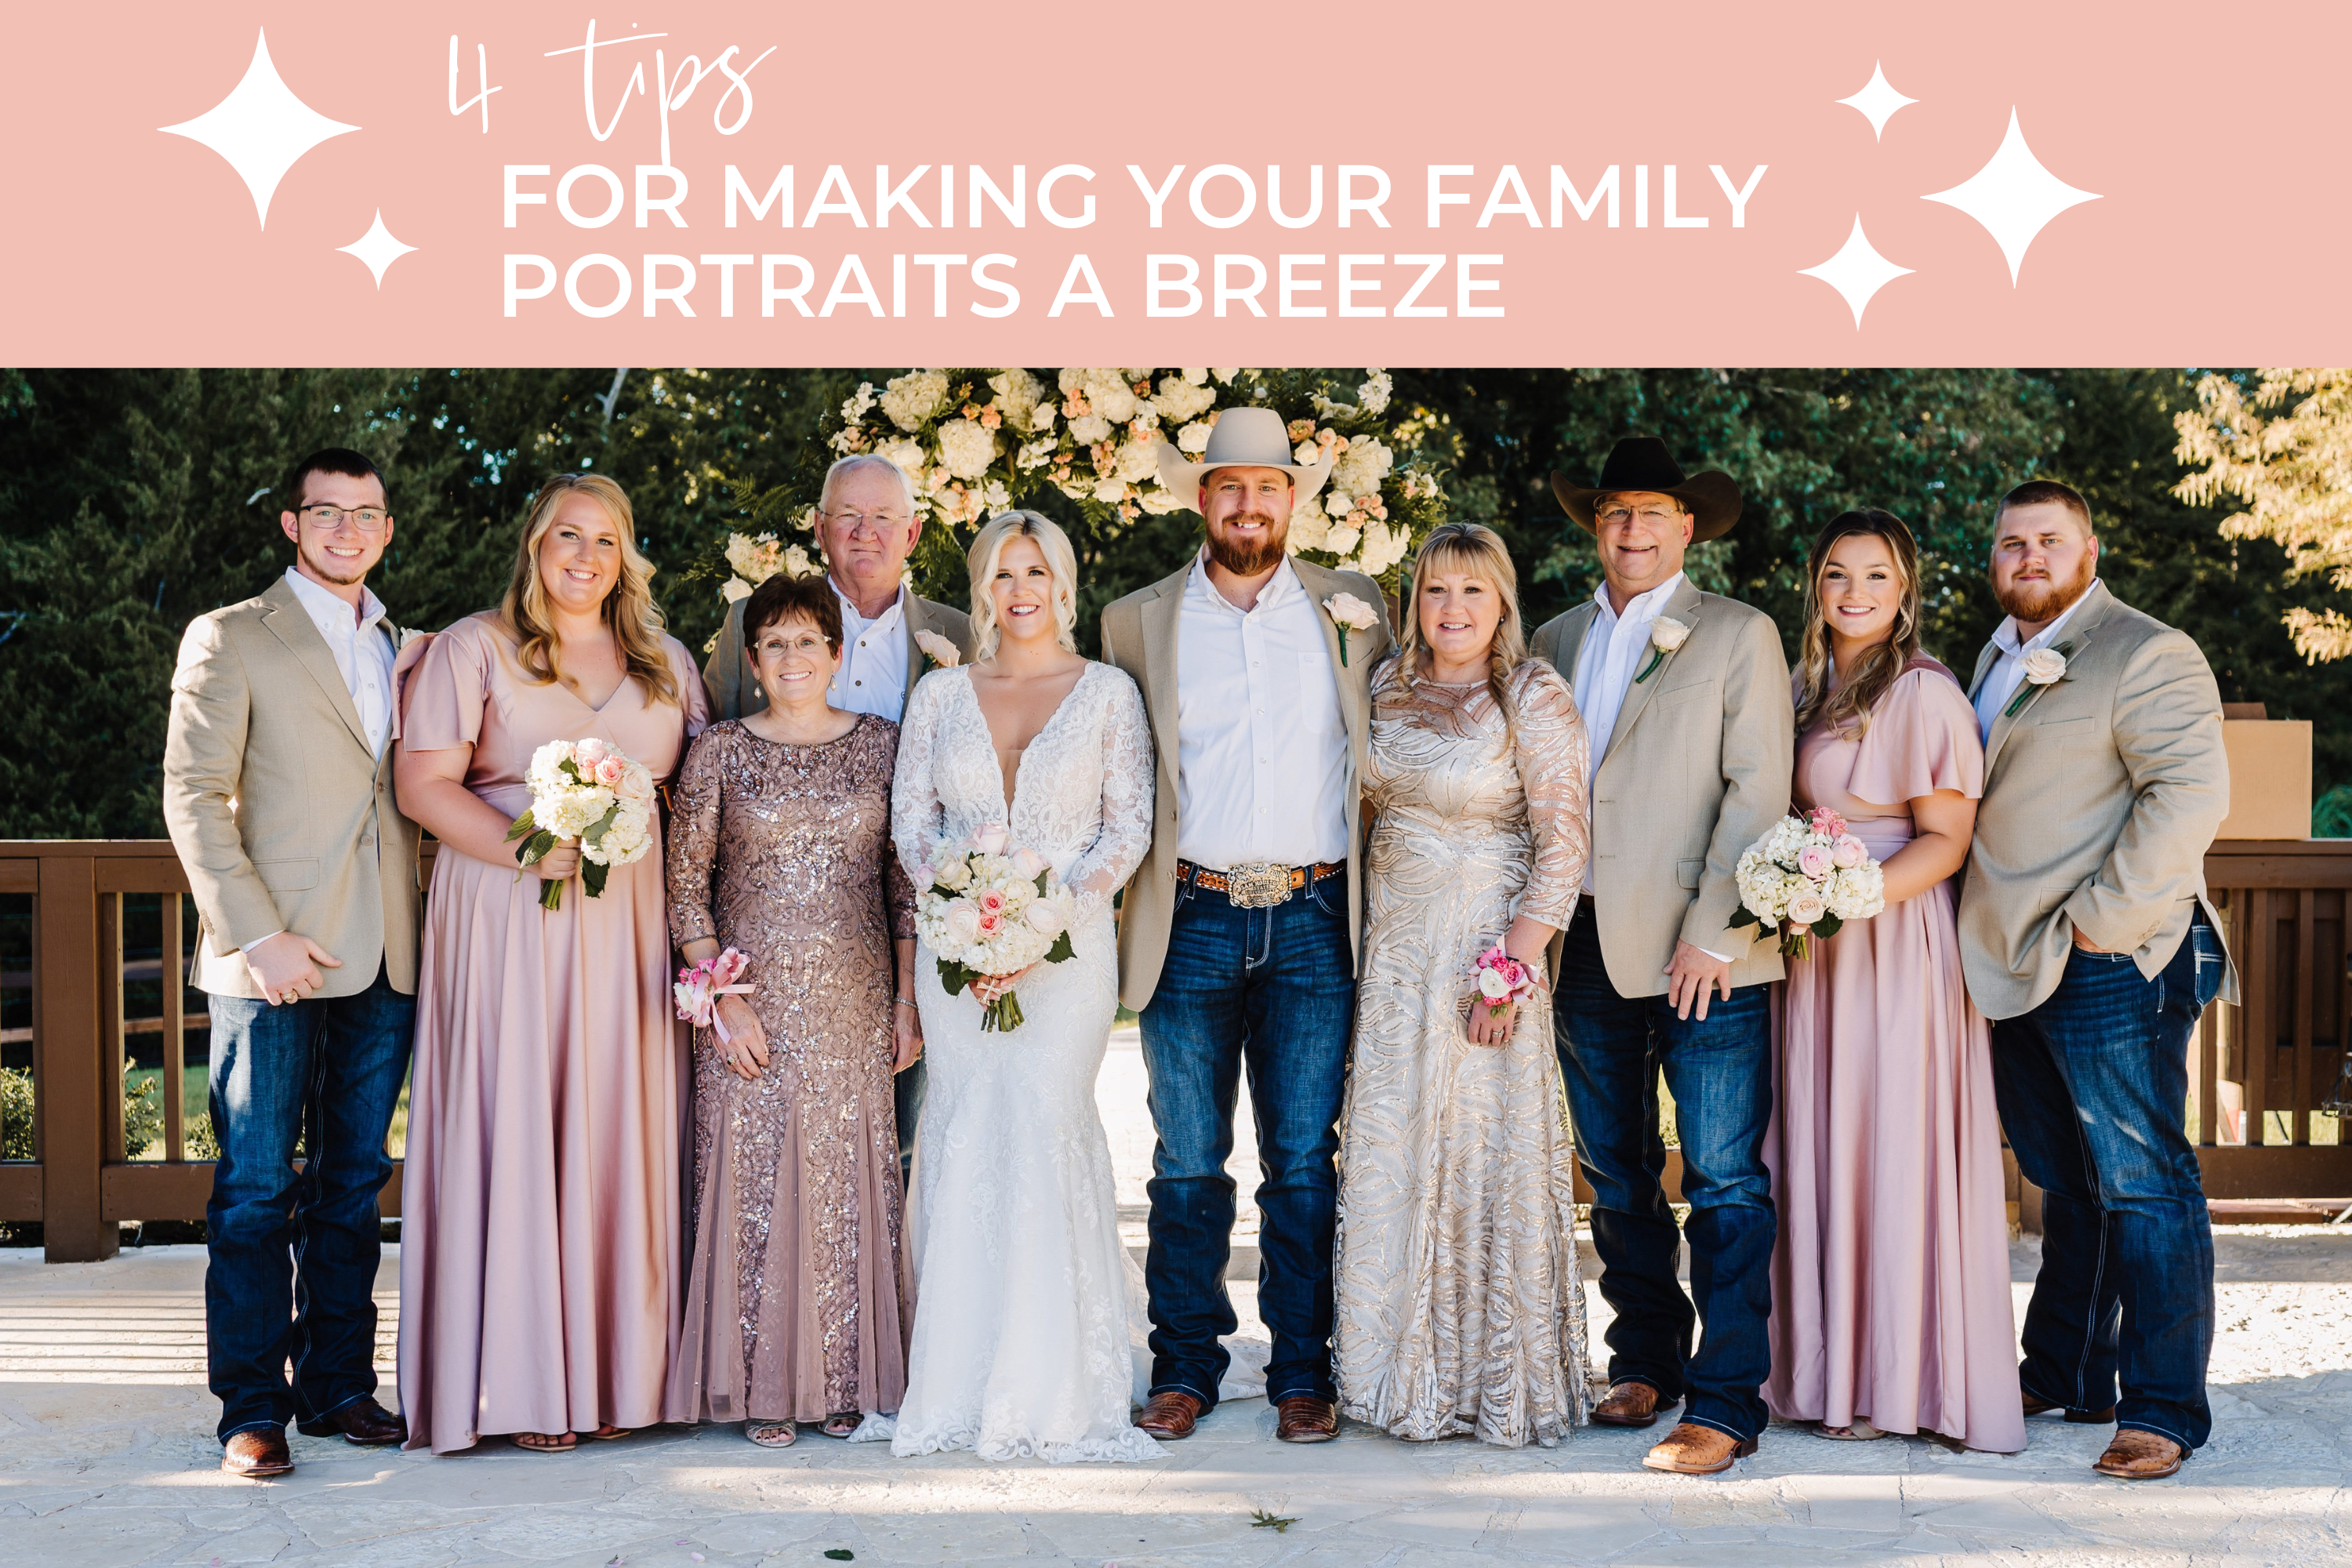 Tips for Making Your Family Portraits a Breeze